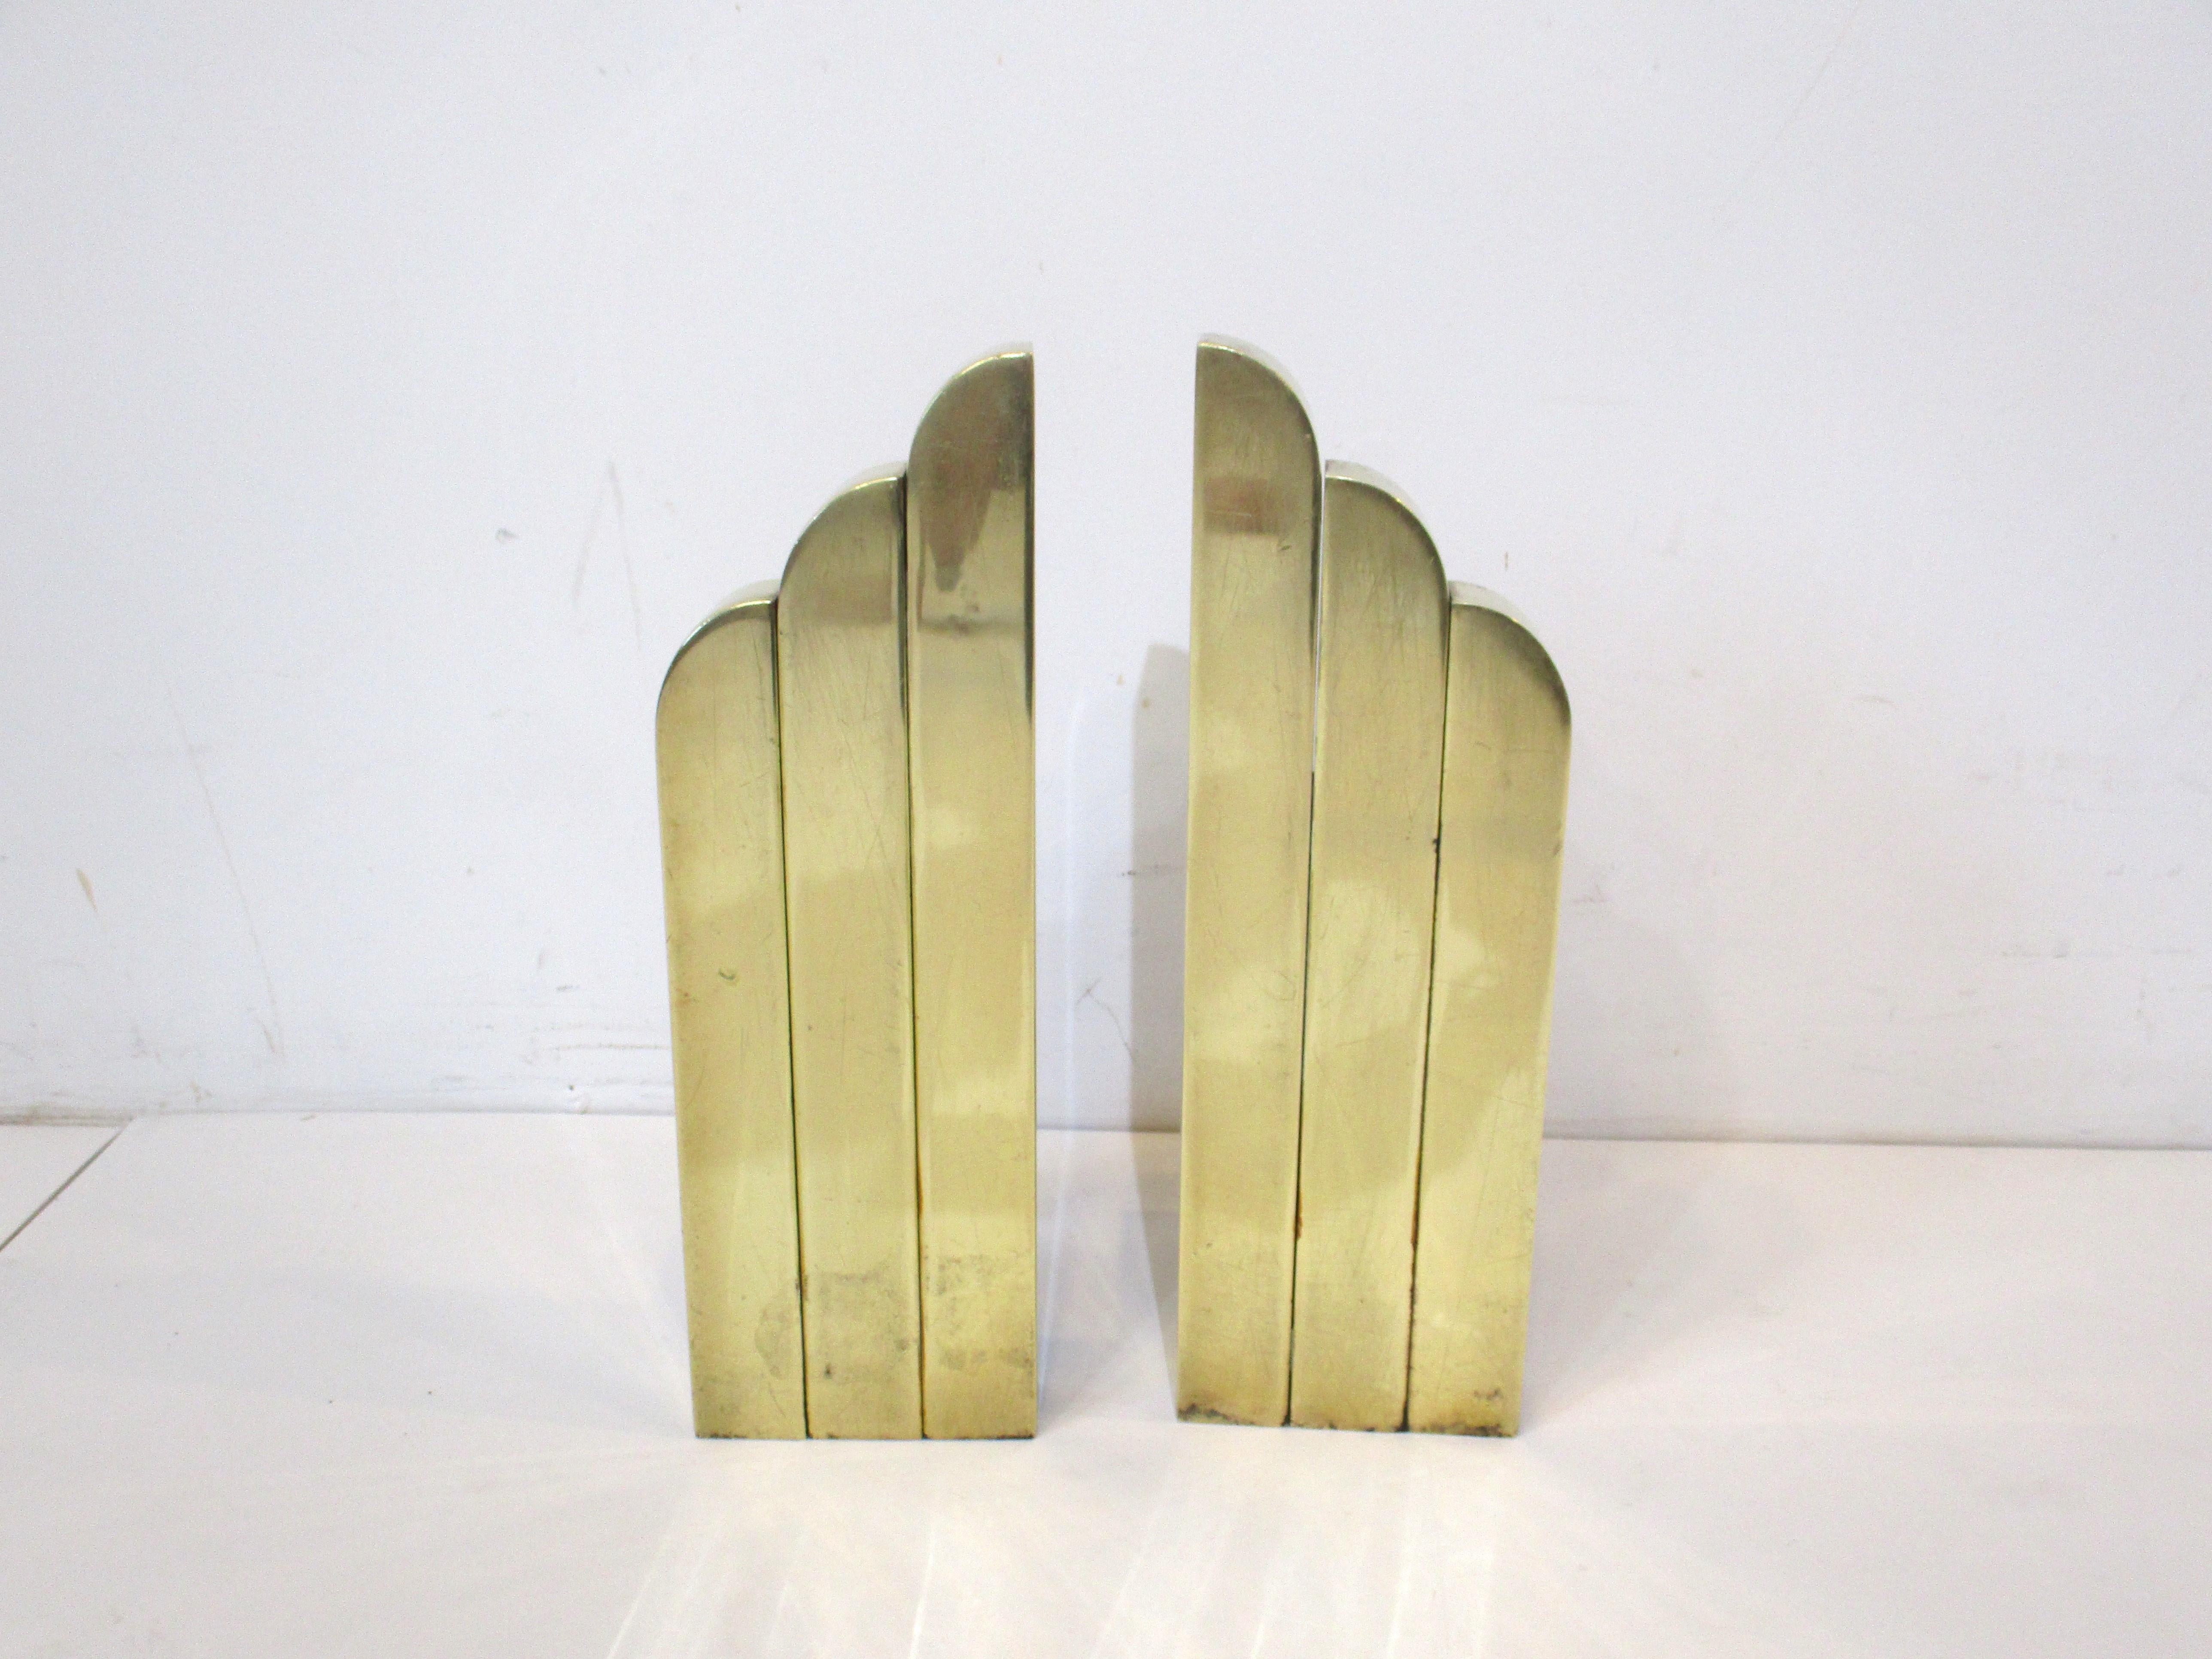 A pair of very well crafted vintage Art Deco streamline skyscraper fireplace andirons in solid brass with iron back legs. Having a scalloped top with waterfall design giving them a sophisticated and rich look , each piece has numbers and letters